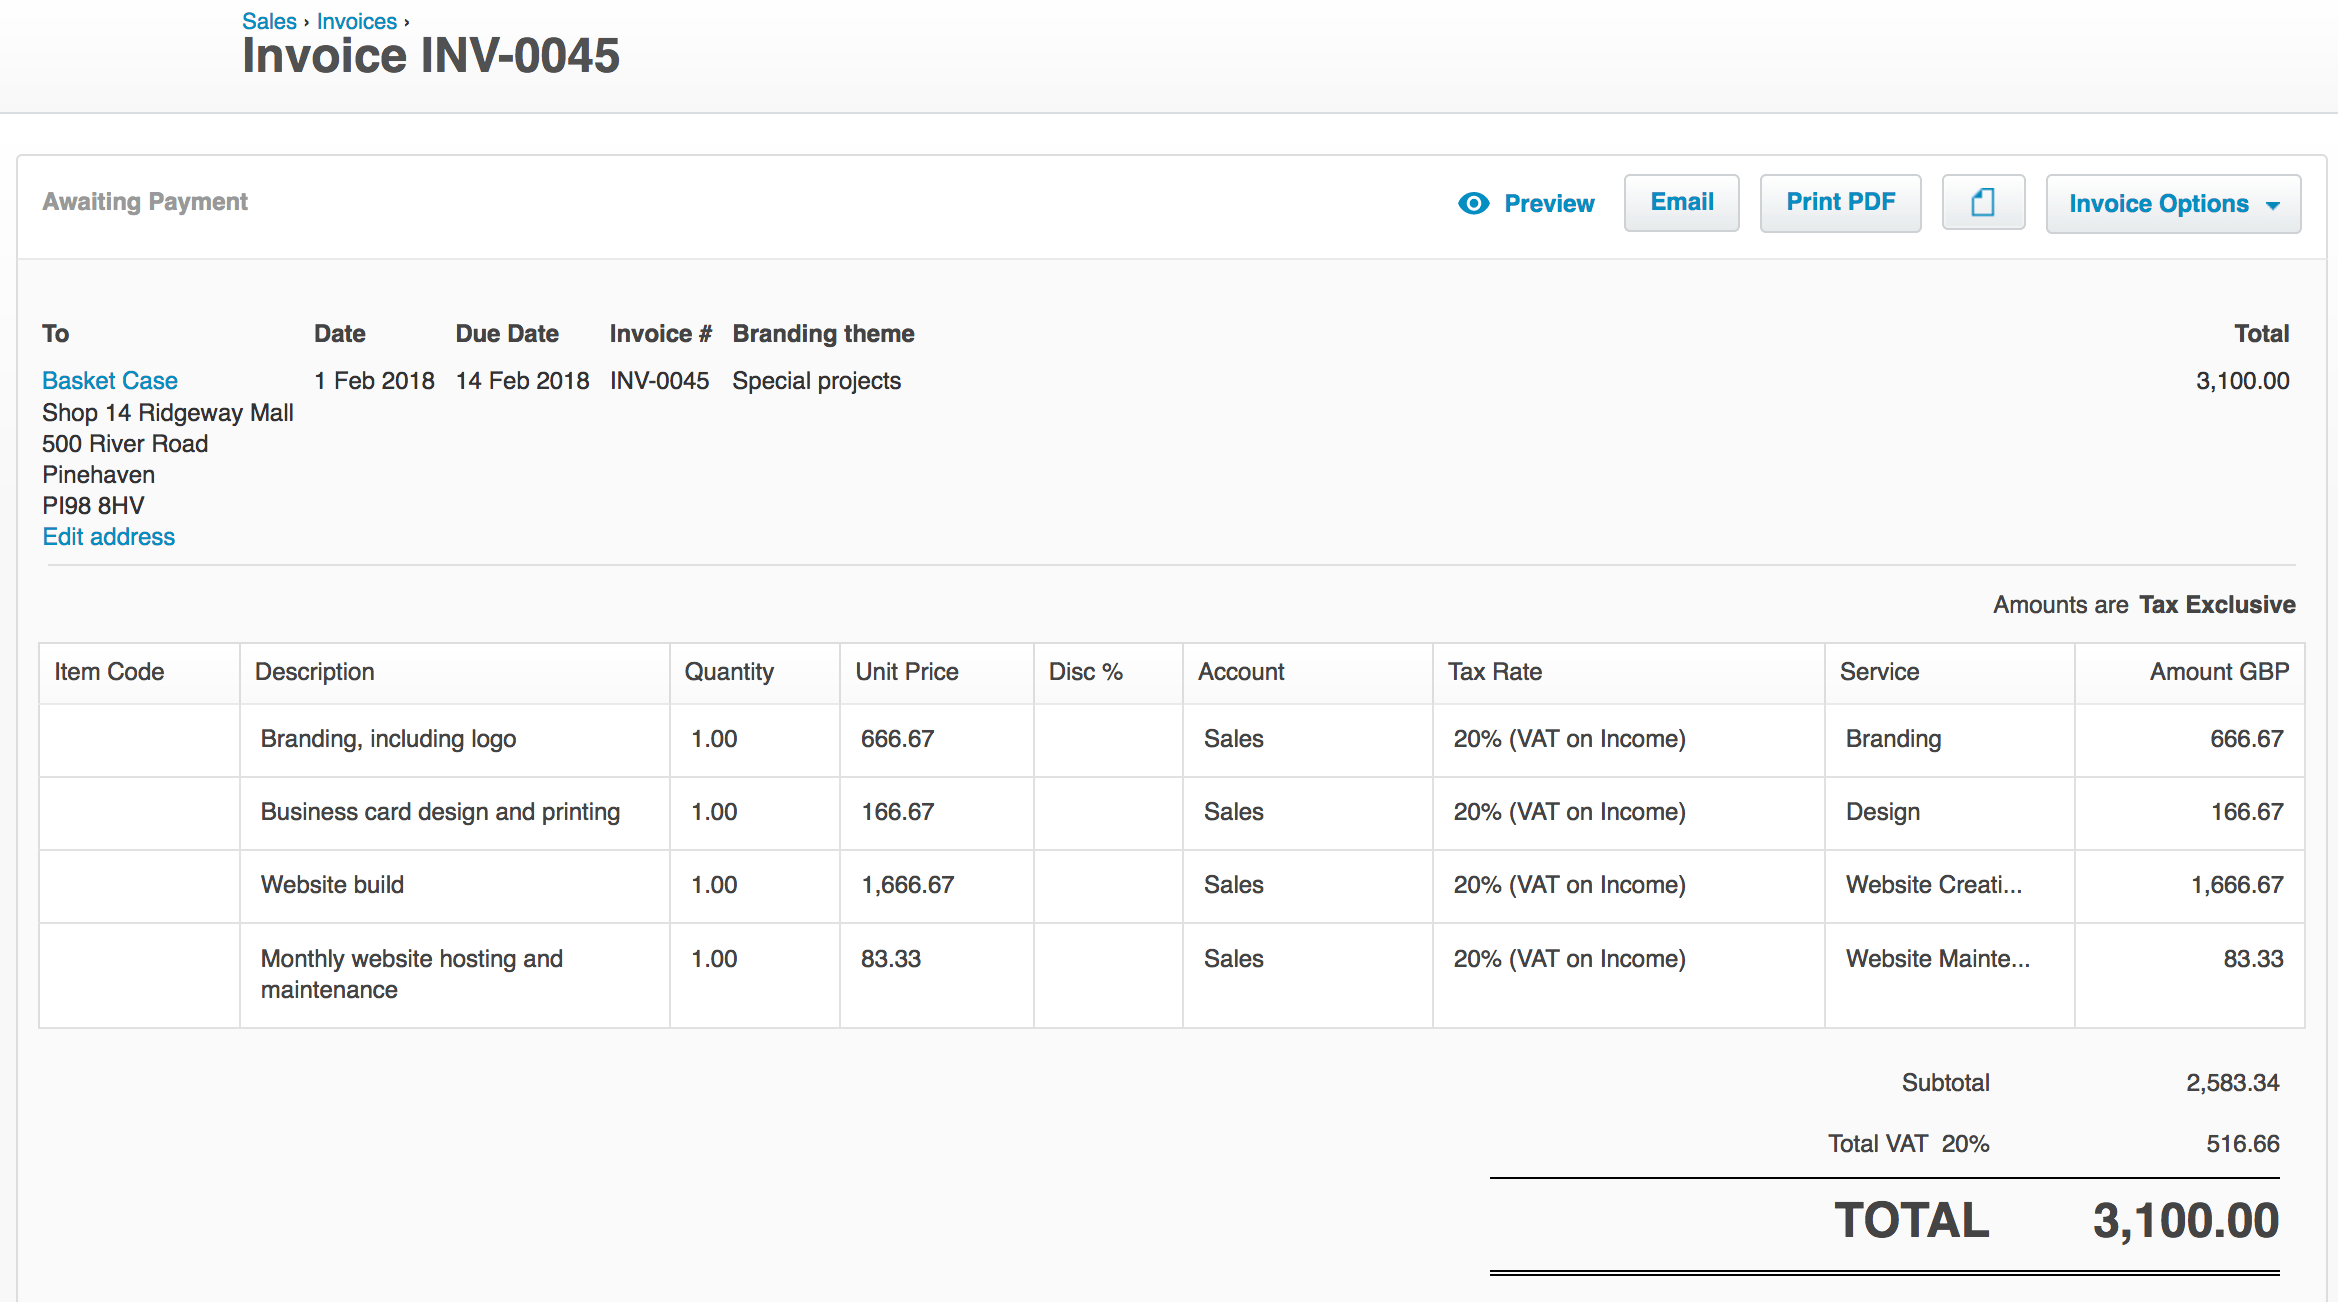 Sales invoice showing multiple services